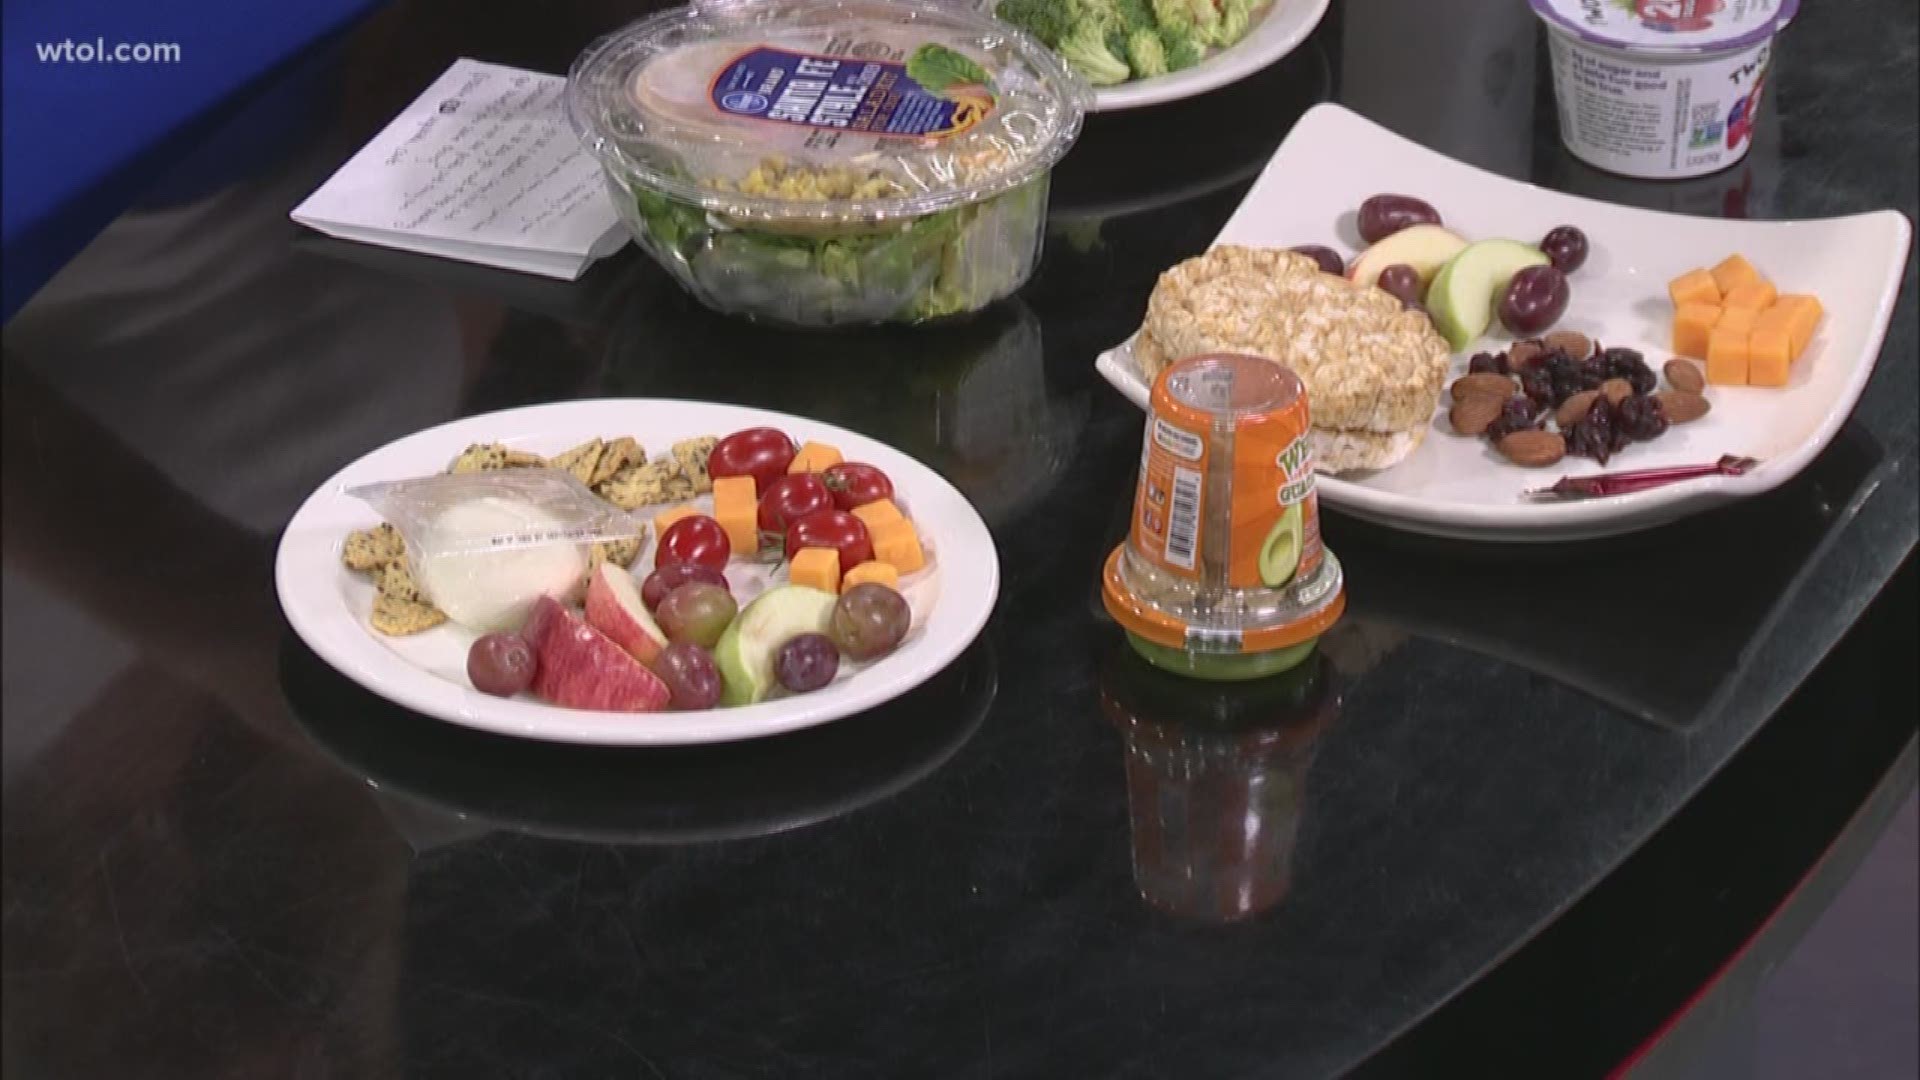 Michelle Backus explains how to easily prepare a well-balanced meal that will keep your kids full at lunchtime.